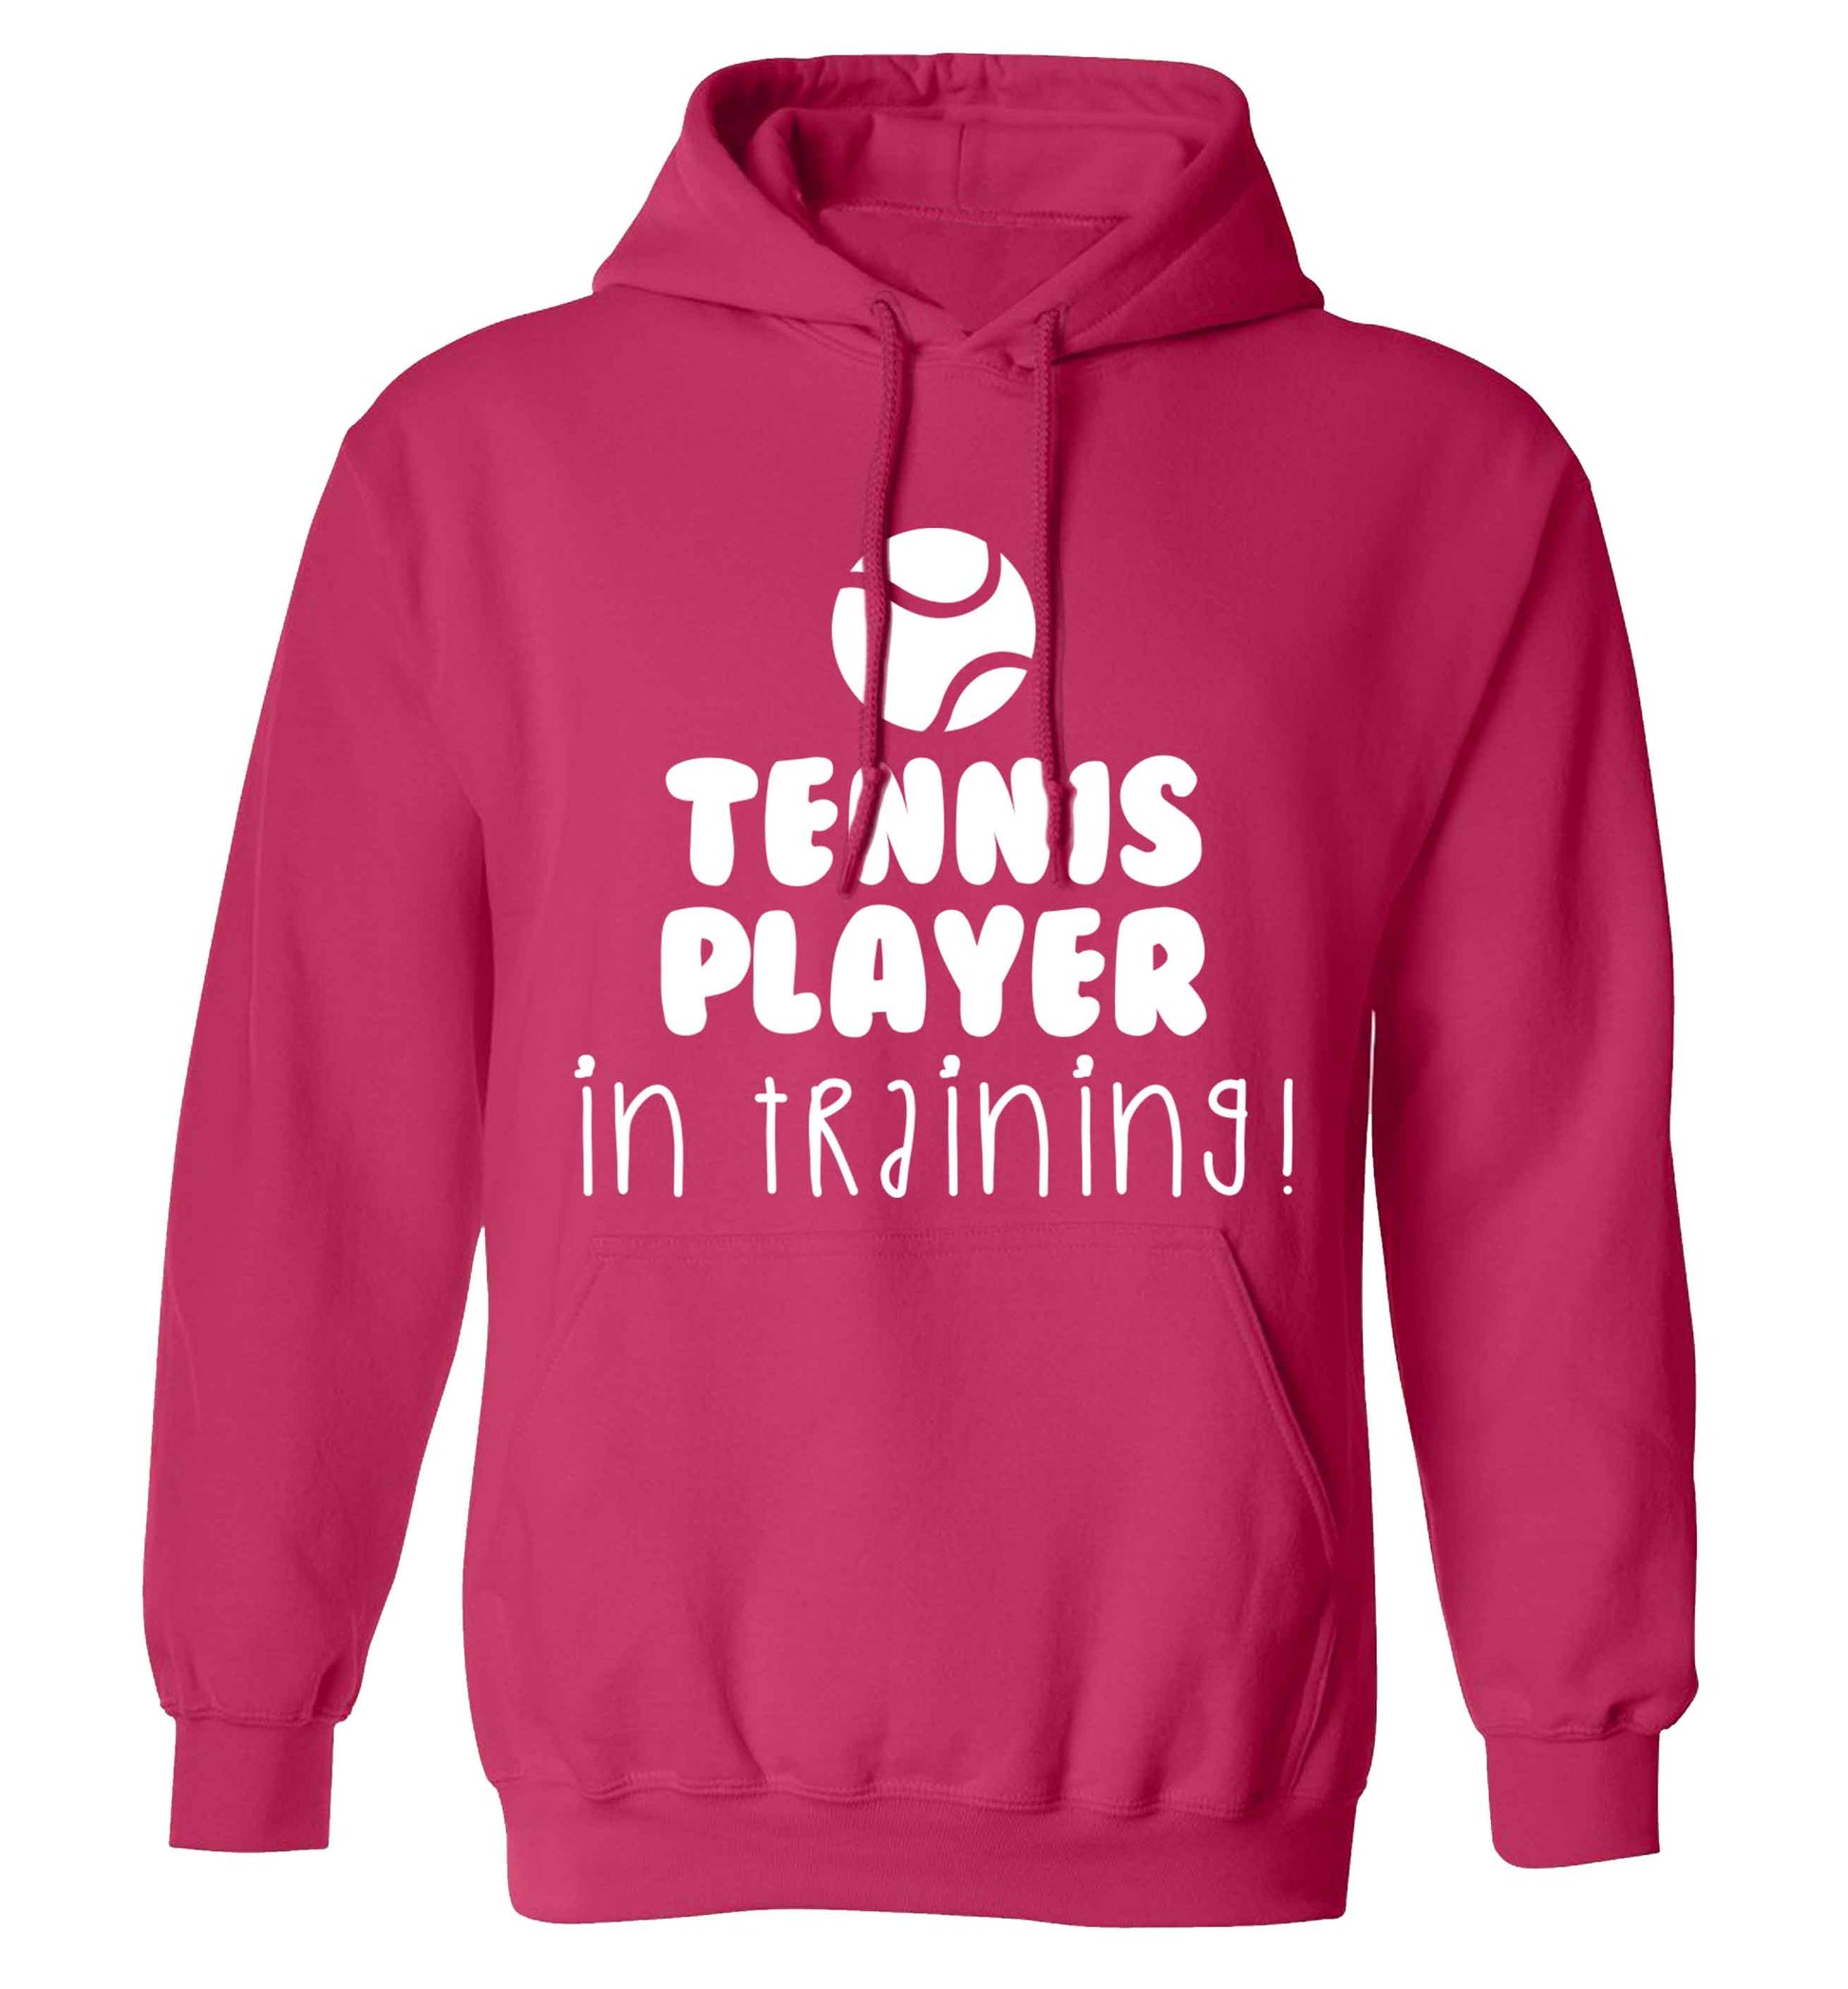 Tennis player in training adults unisex pink hoodie 2XL